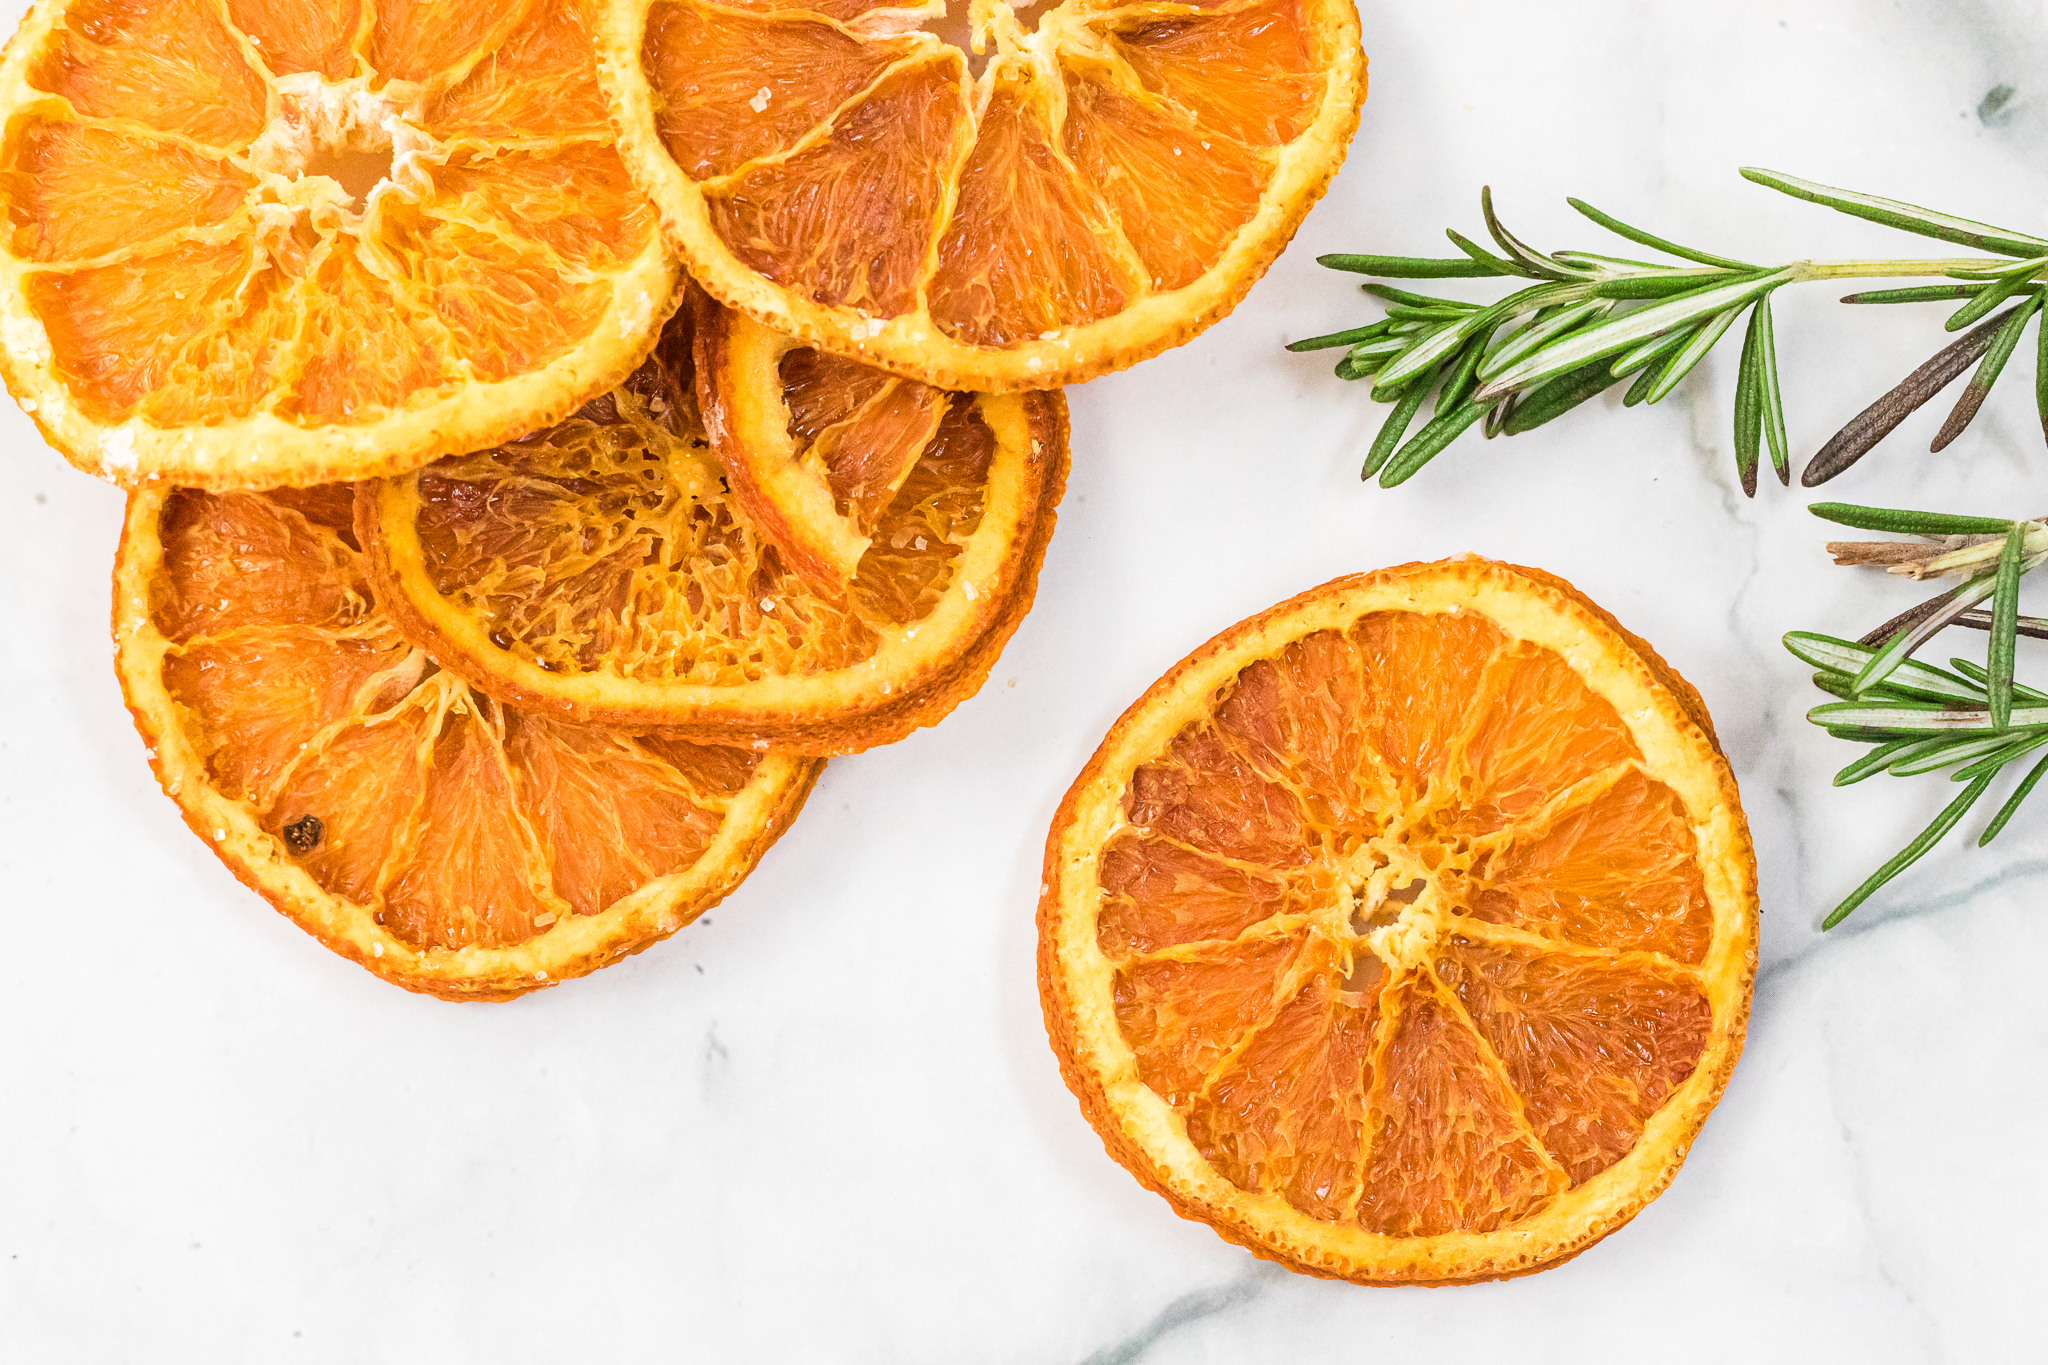 How to Make Dried Orange Slices - Frugal Mom Eh!